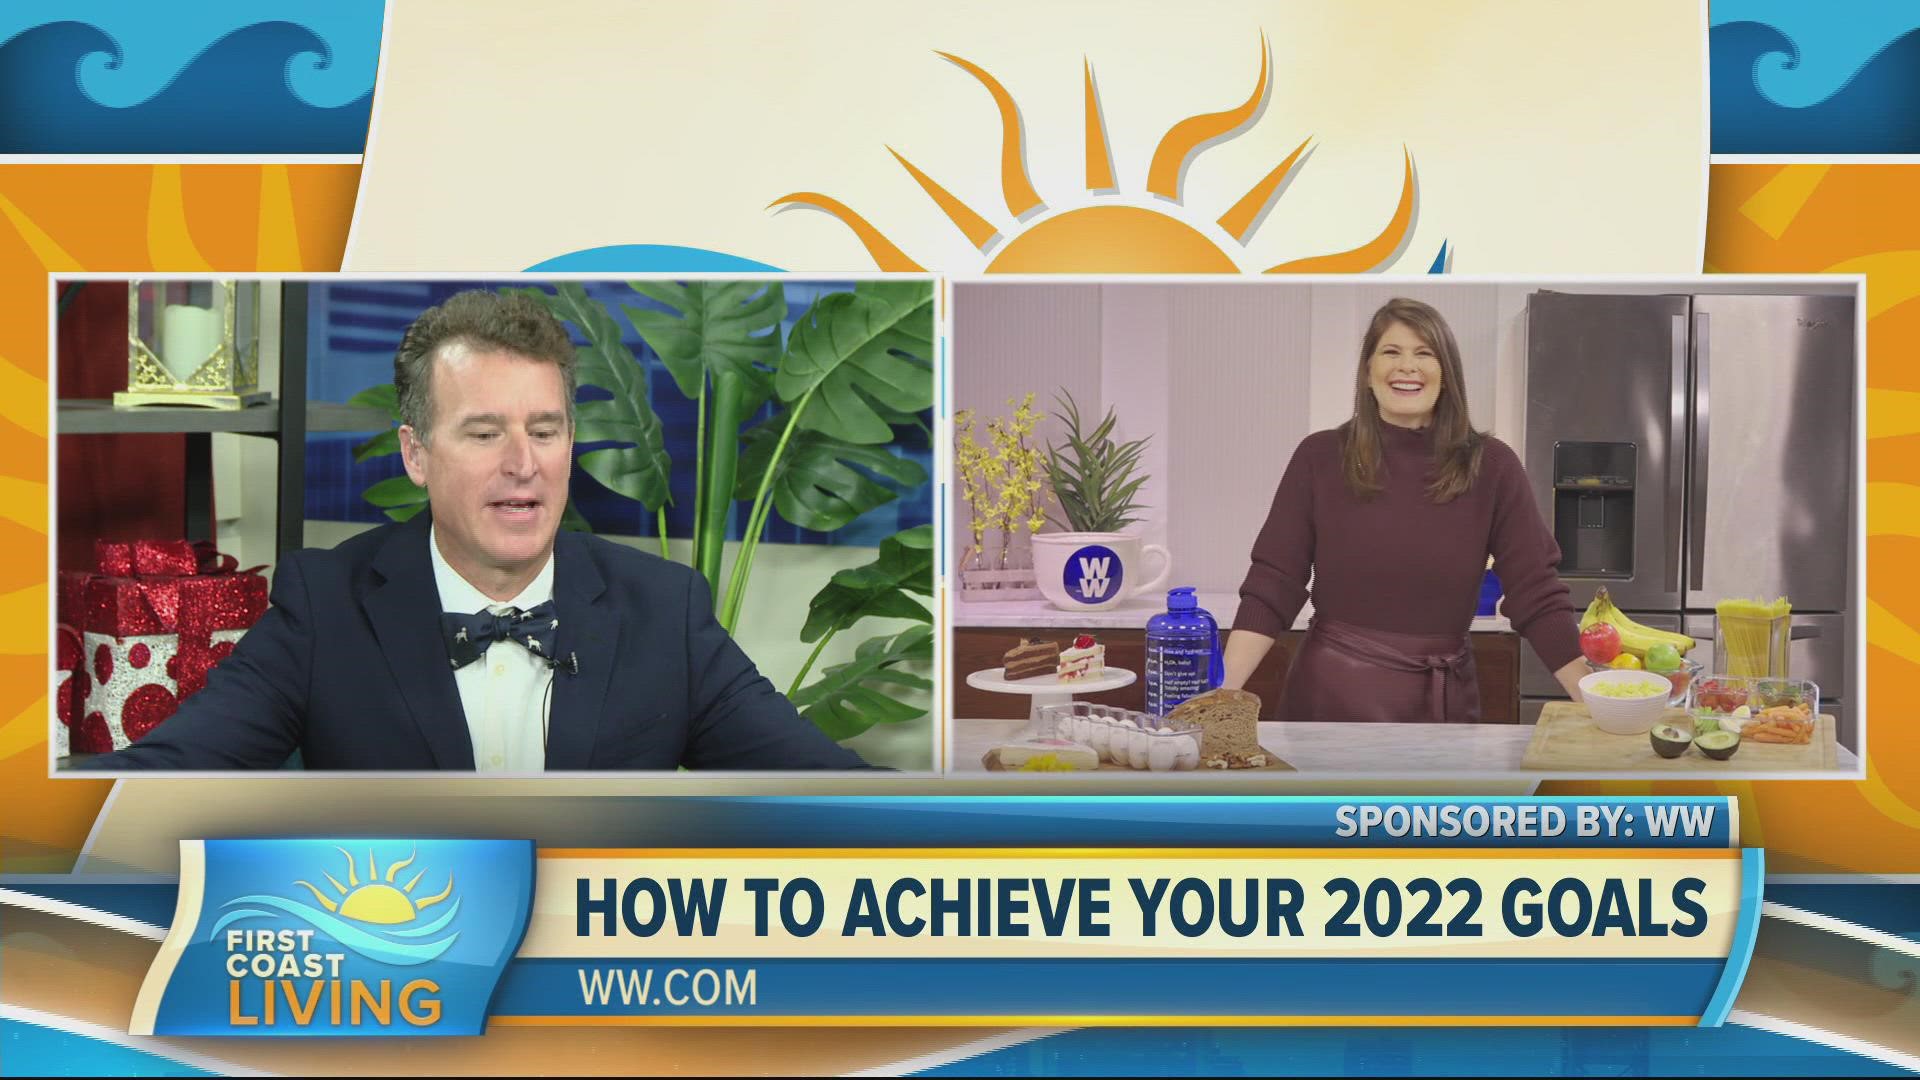 Wellness coach, Lisa Shaub shares advice on setting yourself up for success in the New Year and beyond.